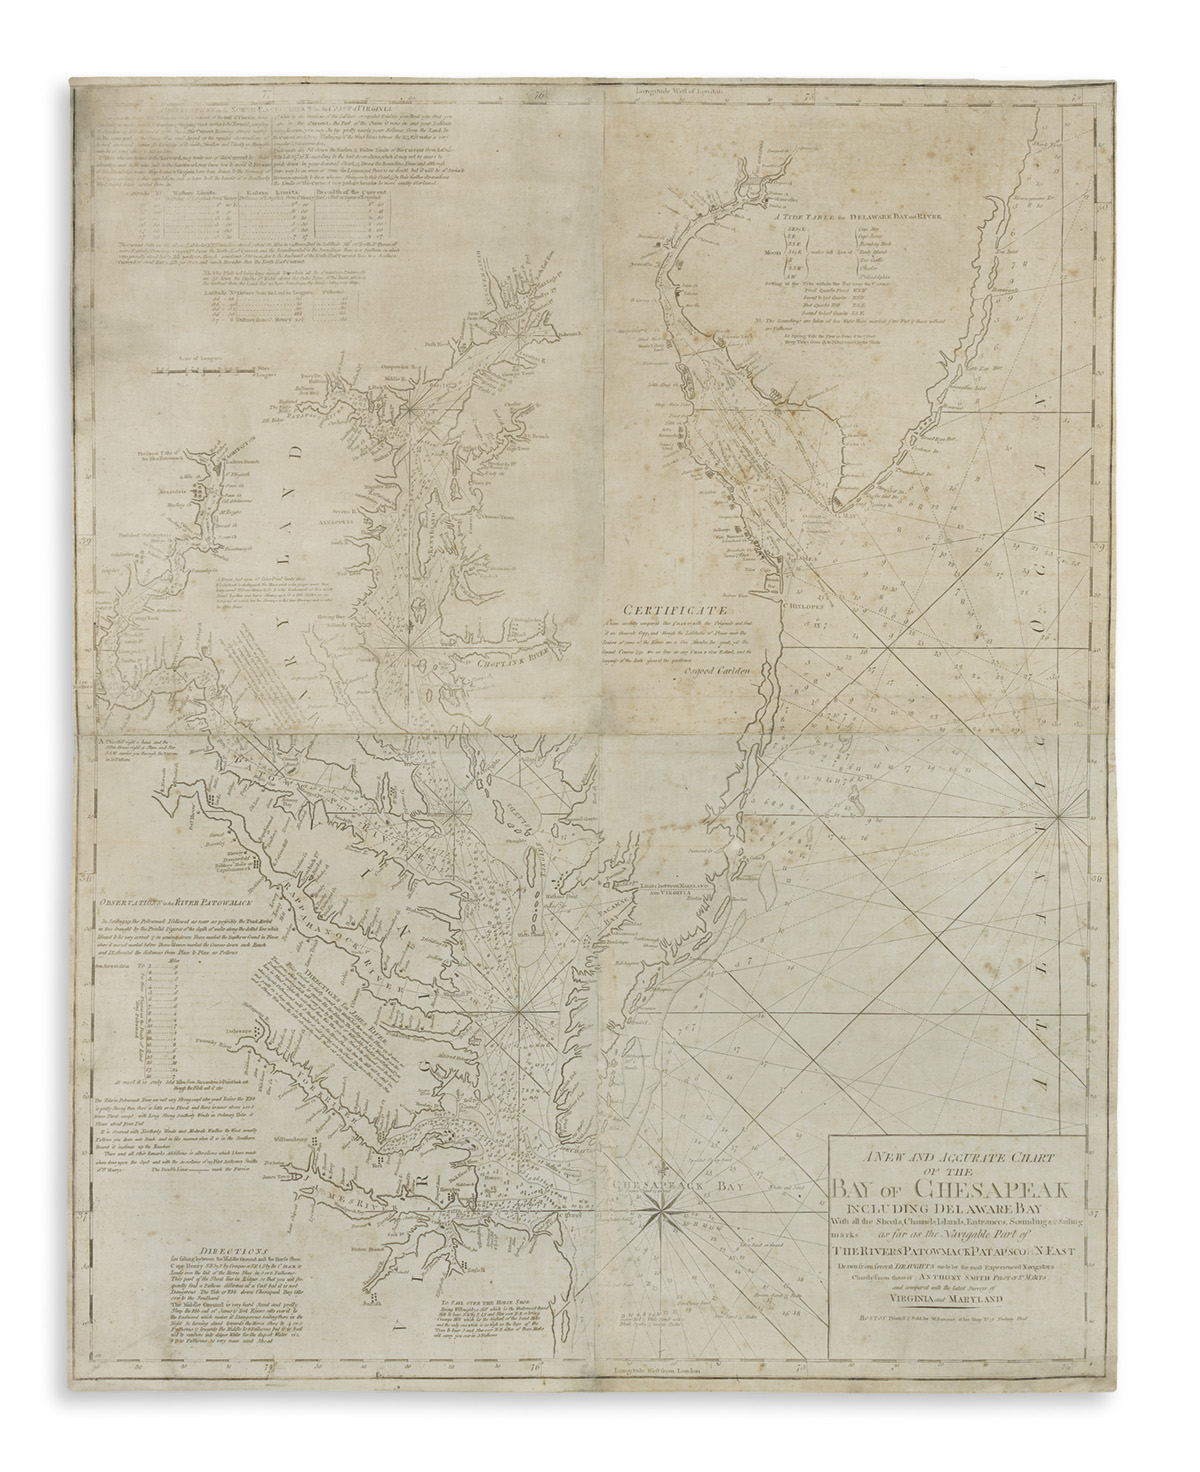 NORMAN, JOHN and WILLIAM. A New and Accurate Chart of the Bay of Chesapeak